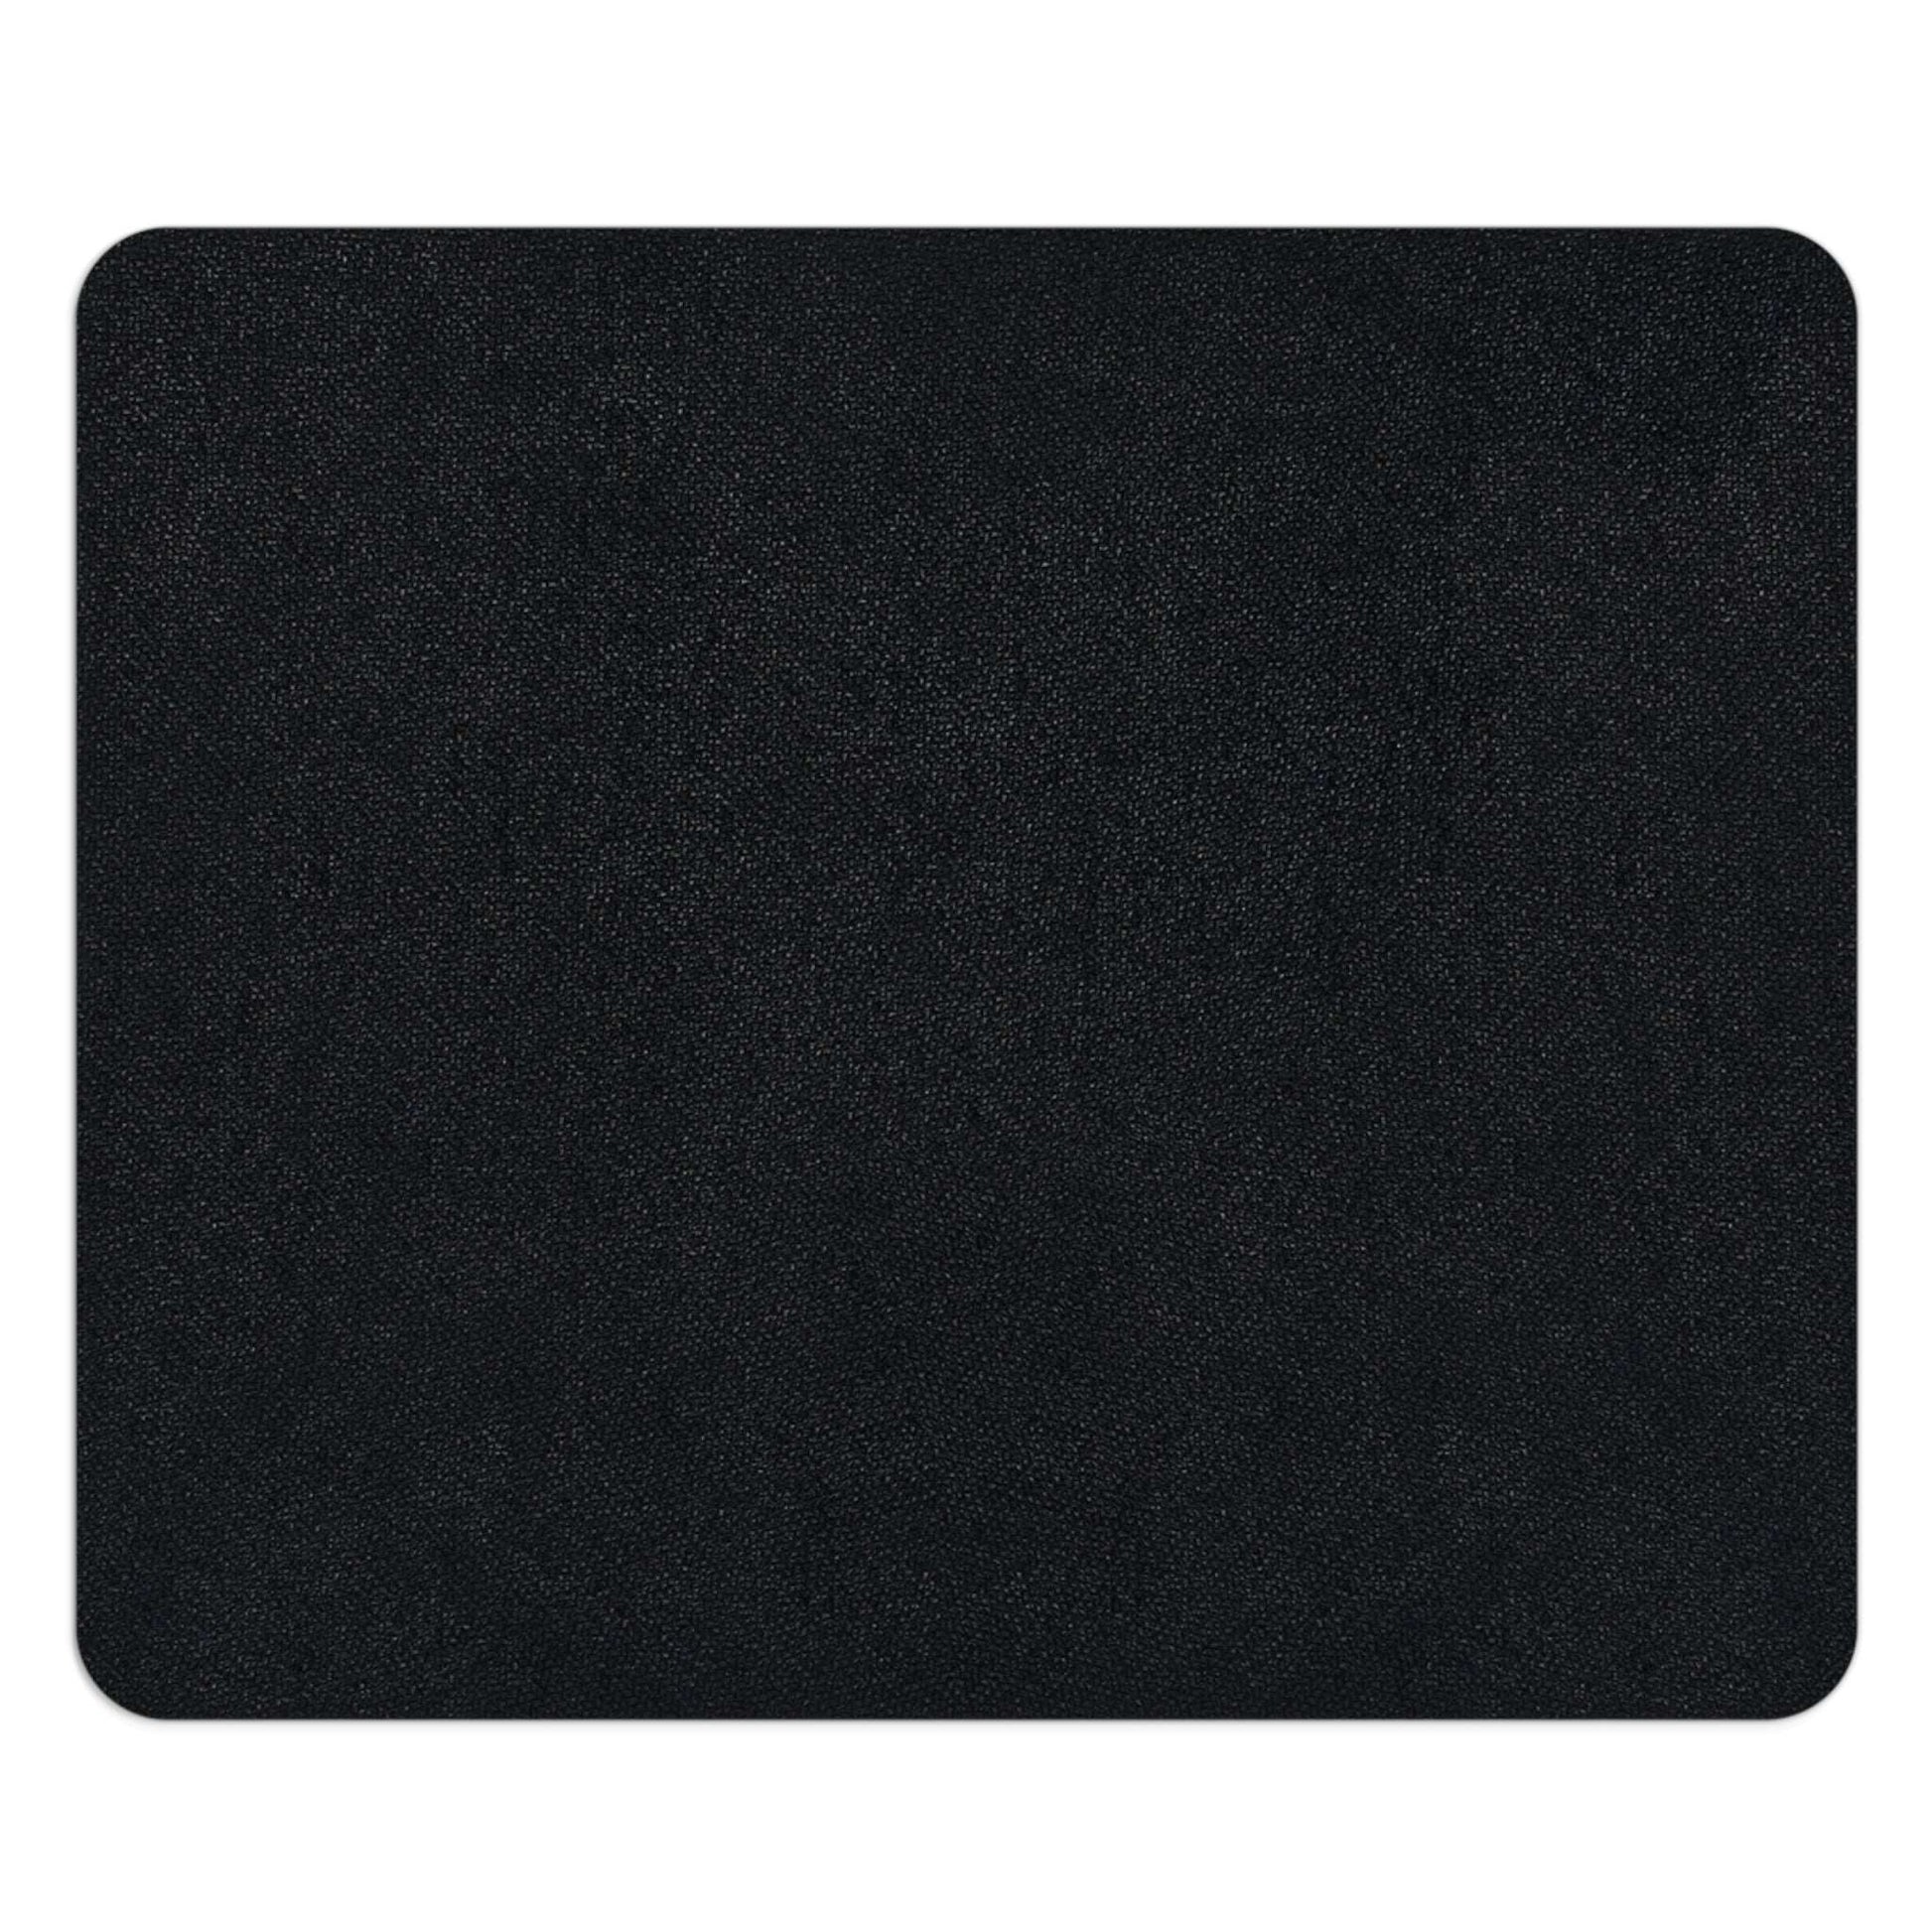 Computer Mouse Pad, Non-slip rubber bottom, Orange and Purple Flowers